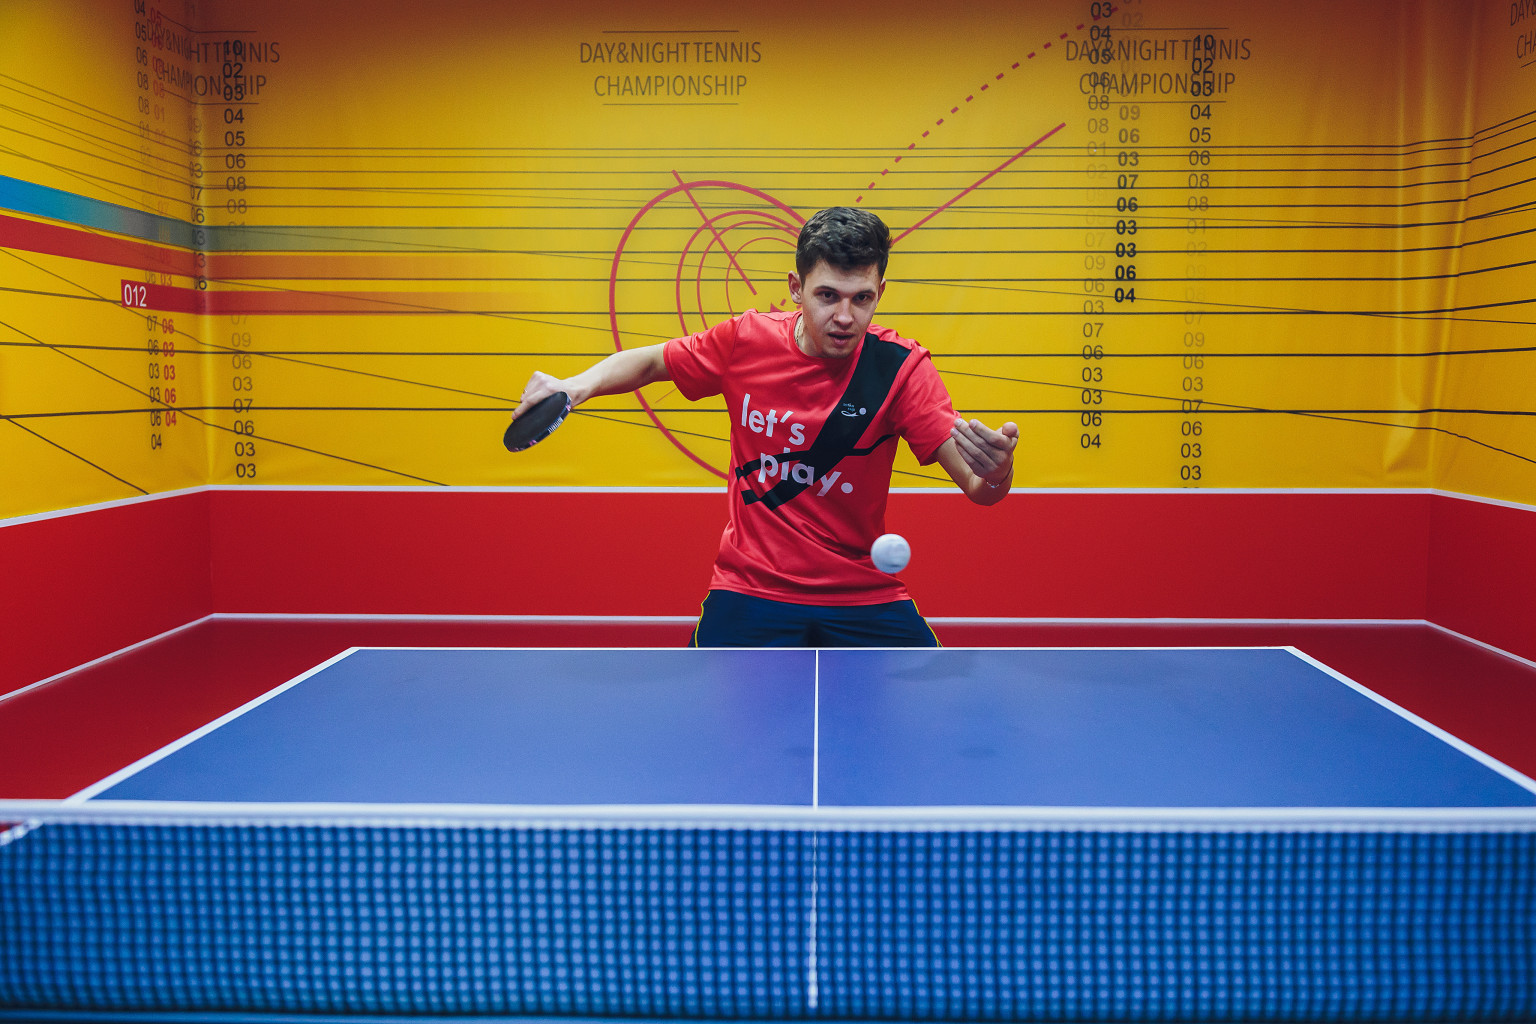 Setka Cup (League of daily tournaments in NT) The largest platform for table tennis development in Ukraine the Setka Cup opens its first location in the EU